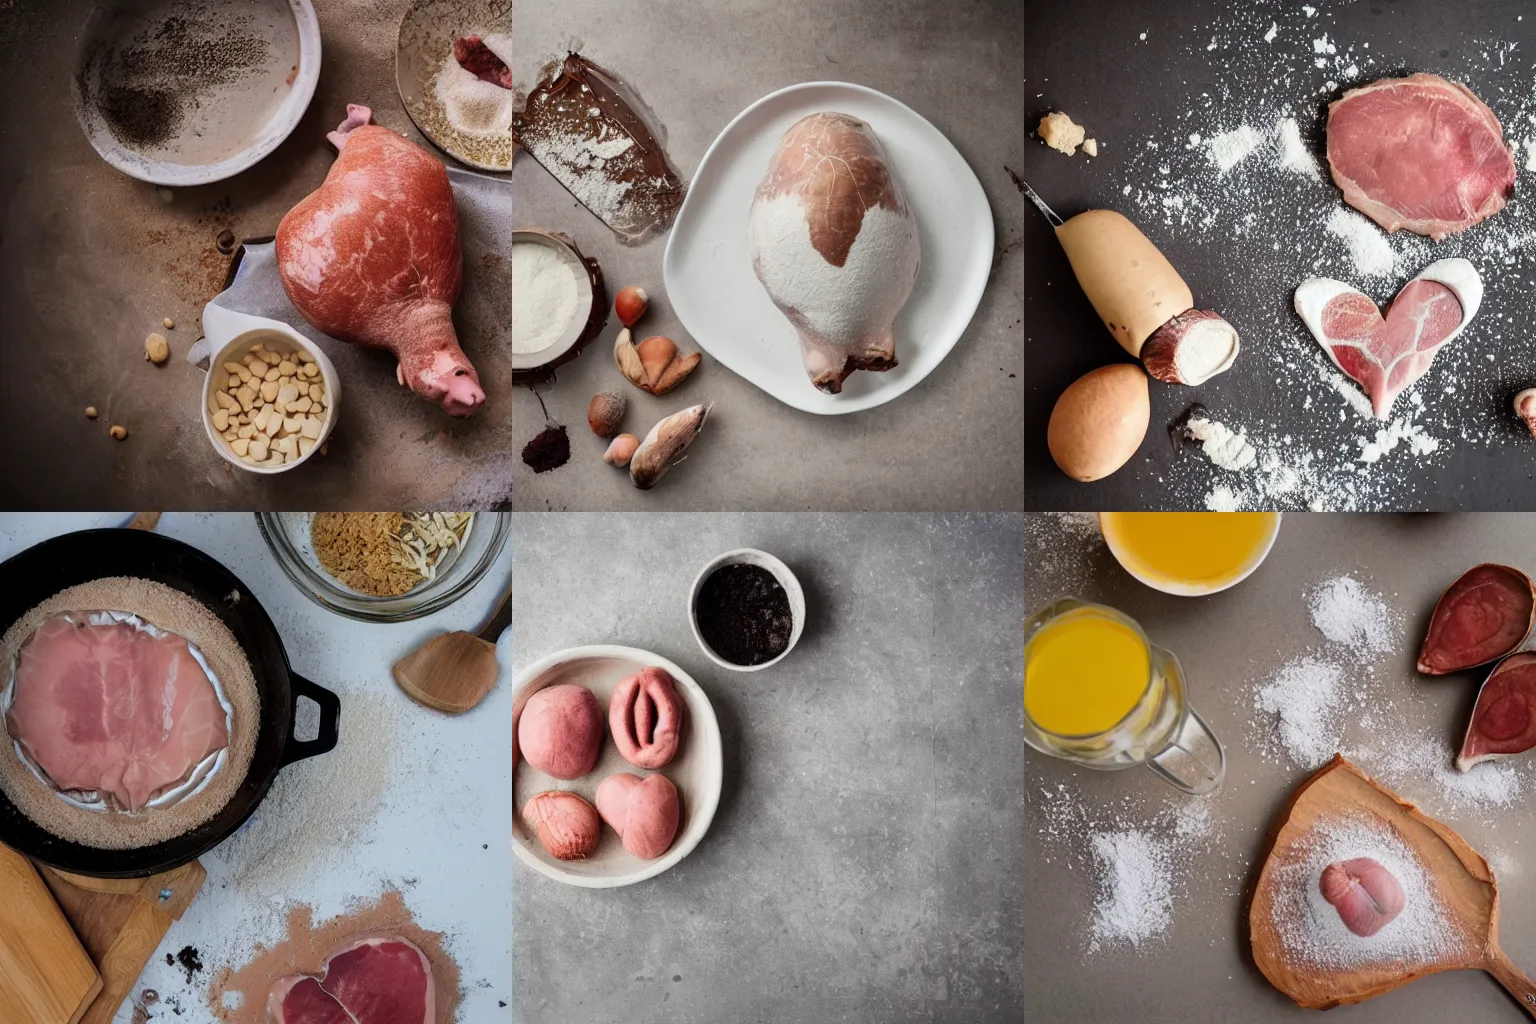 Prompt: photo from above the kitchen counter with flour and a pig heart, food blog photo